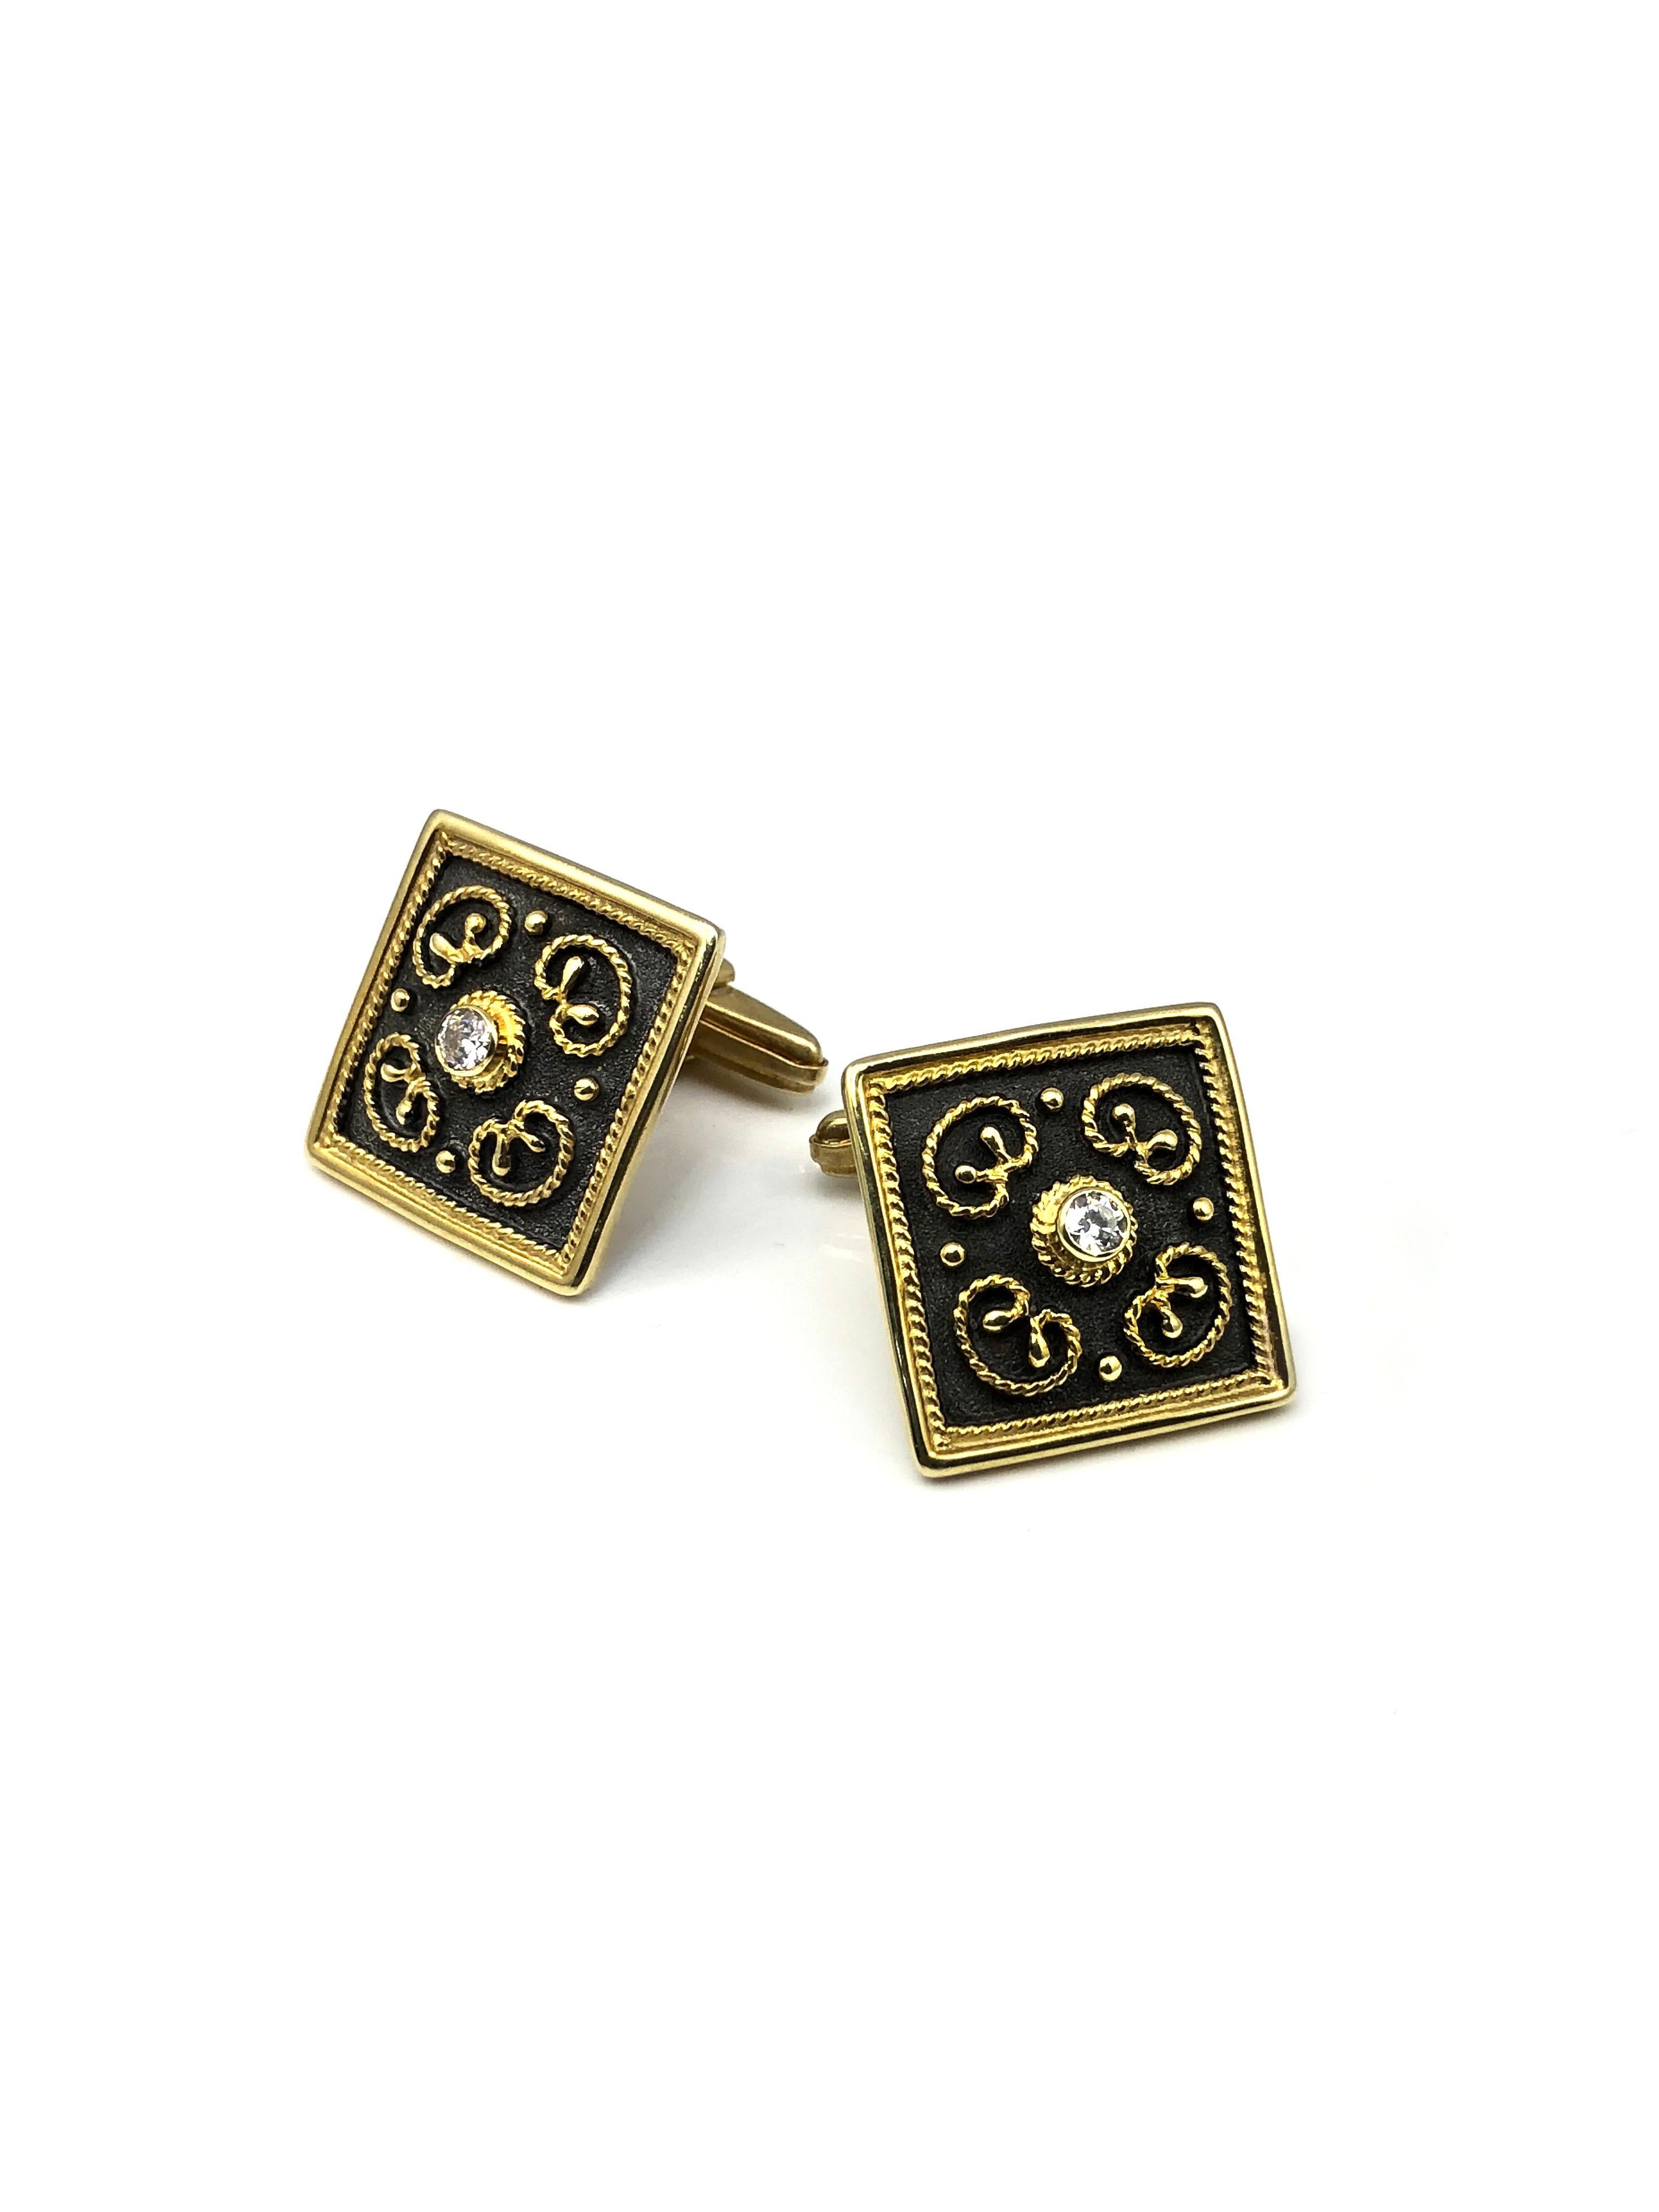 S.Georgios designer Cufflinks is handmade in 18 Karat Yellow Gold and Black oxidized Rhodium all custom-made. Cufflinks are microscopically decorated with granulation work in Byzantine style and with unique velvet background. The center features